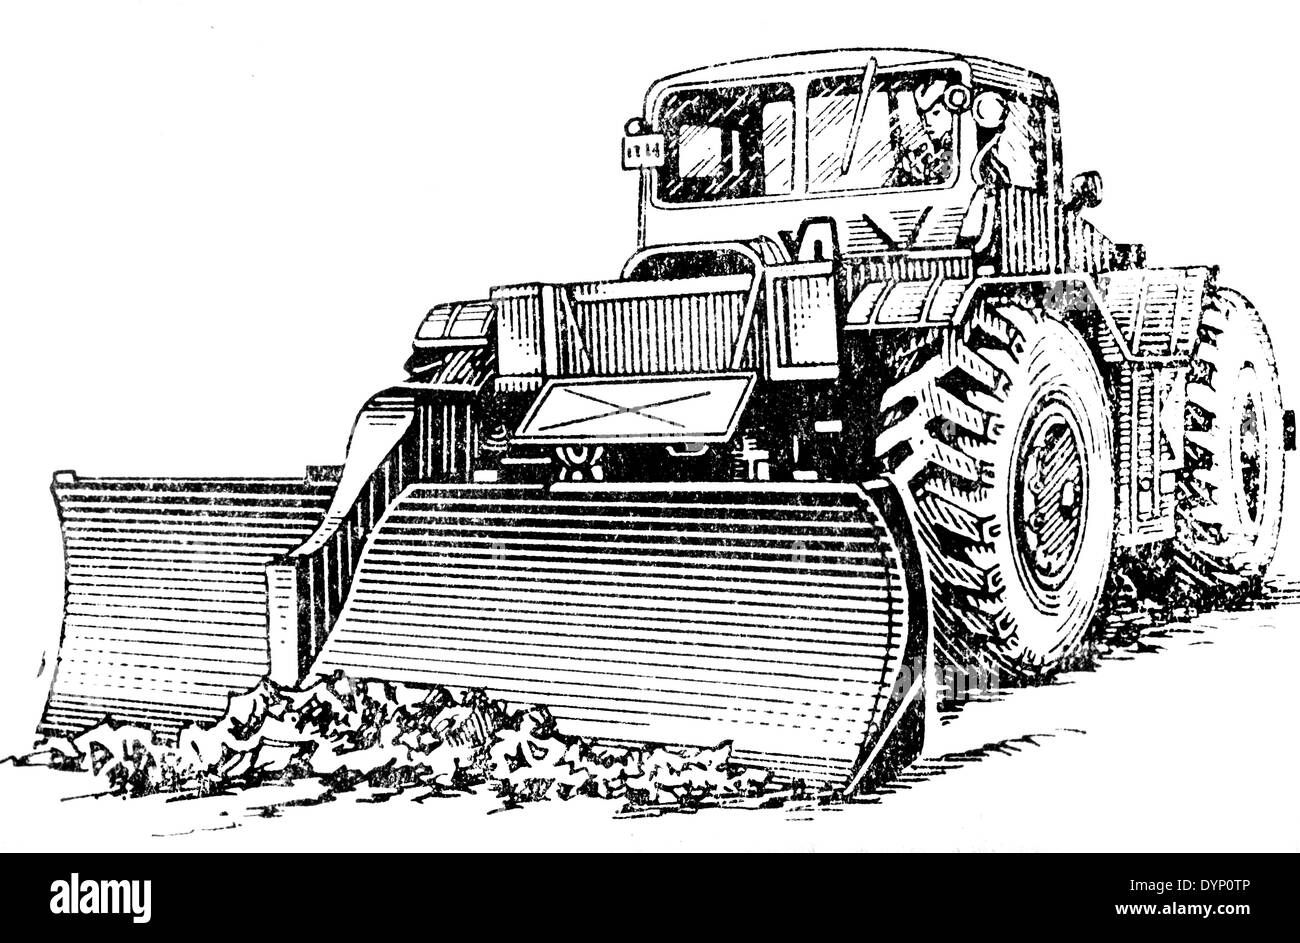 Bulldozer Doodle, A Hand Drawn Vector Doodle Illustration Of A Bulldozer.  Royalty Free SVG, Cliparts, Vectors, And Stock Illustration. Image 60264355.